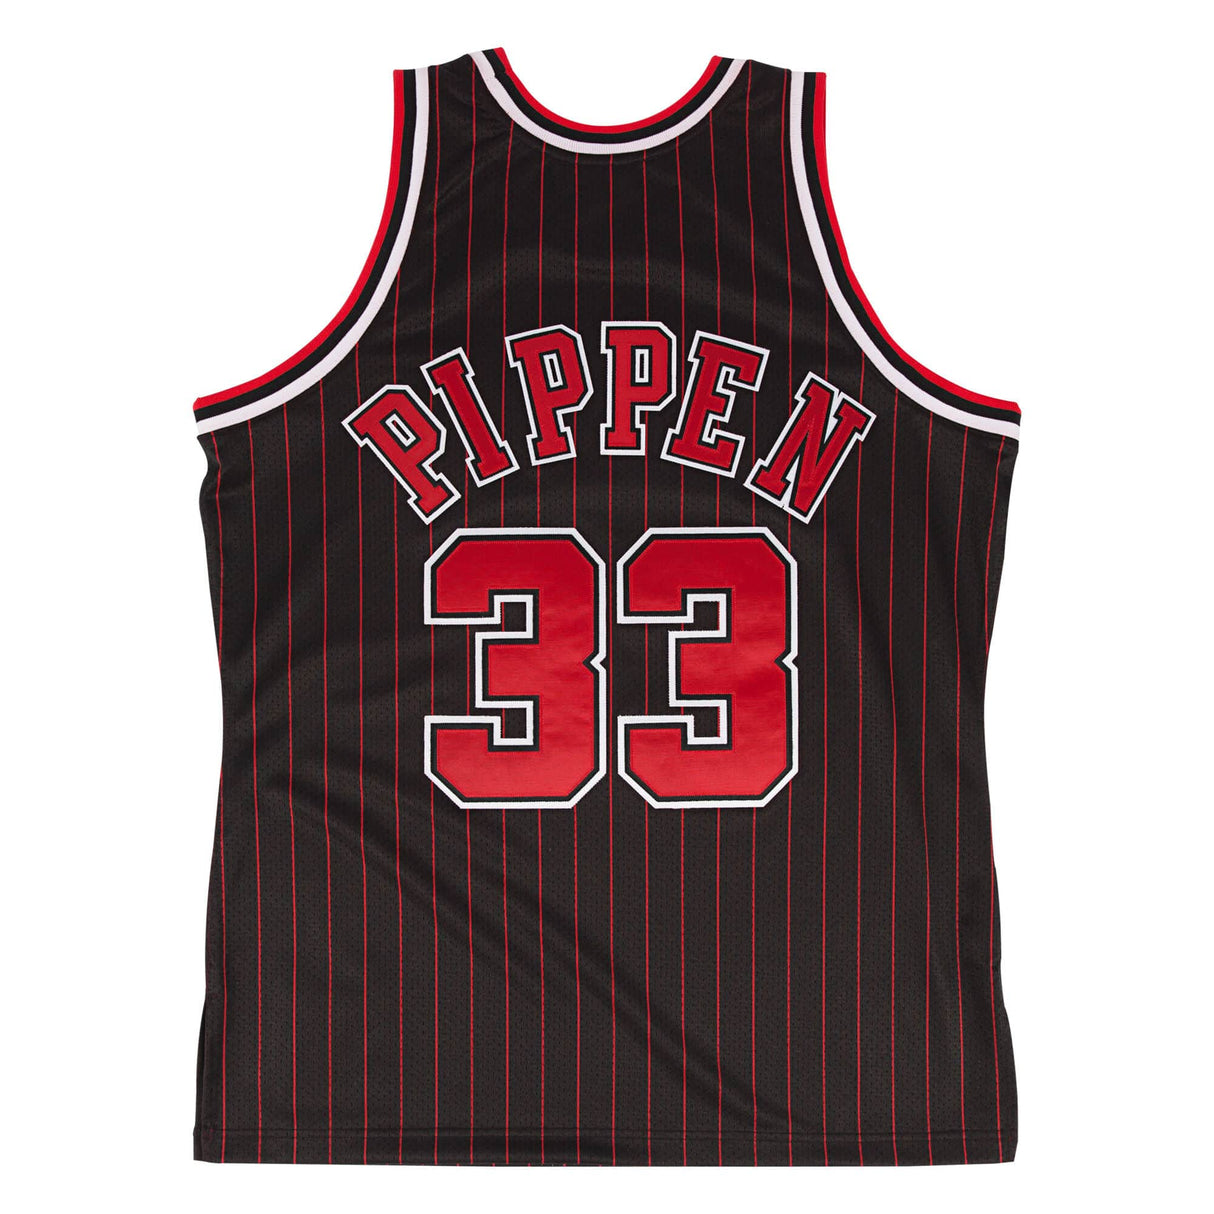 Scottie Pippen Chicago Bulls Jersey - Jersey and Sneakers